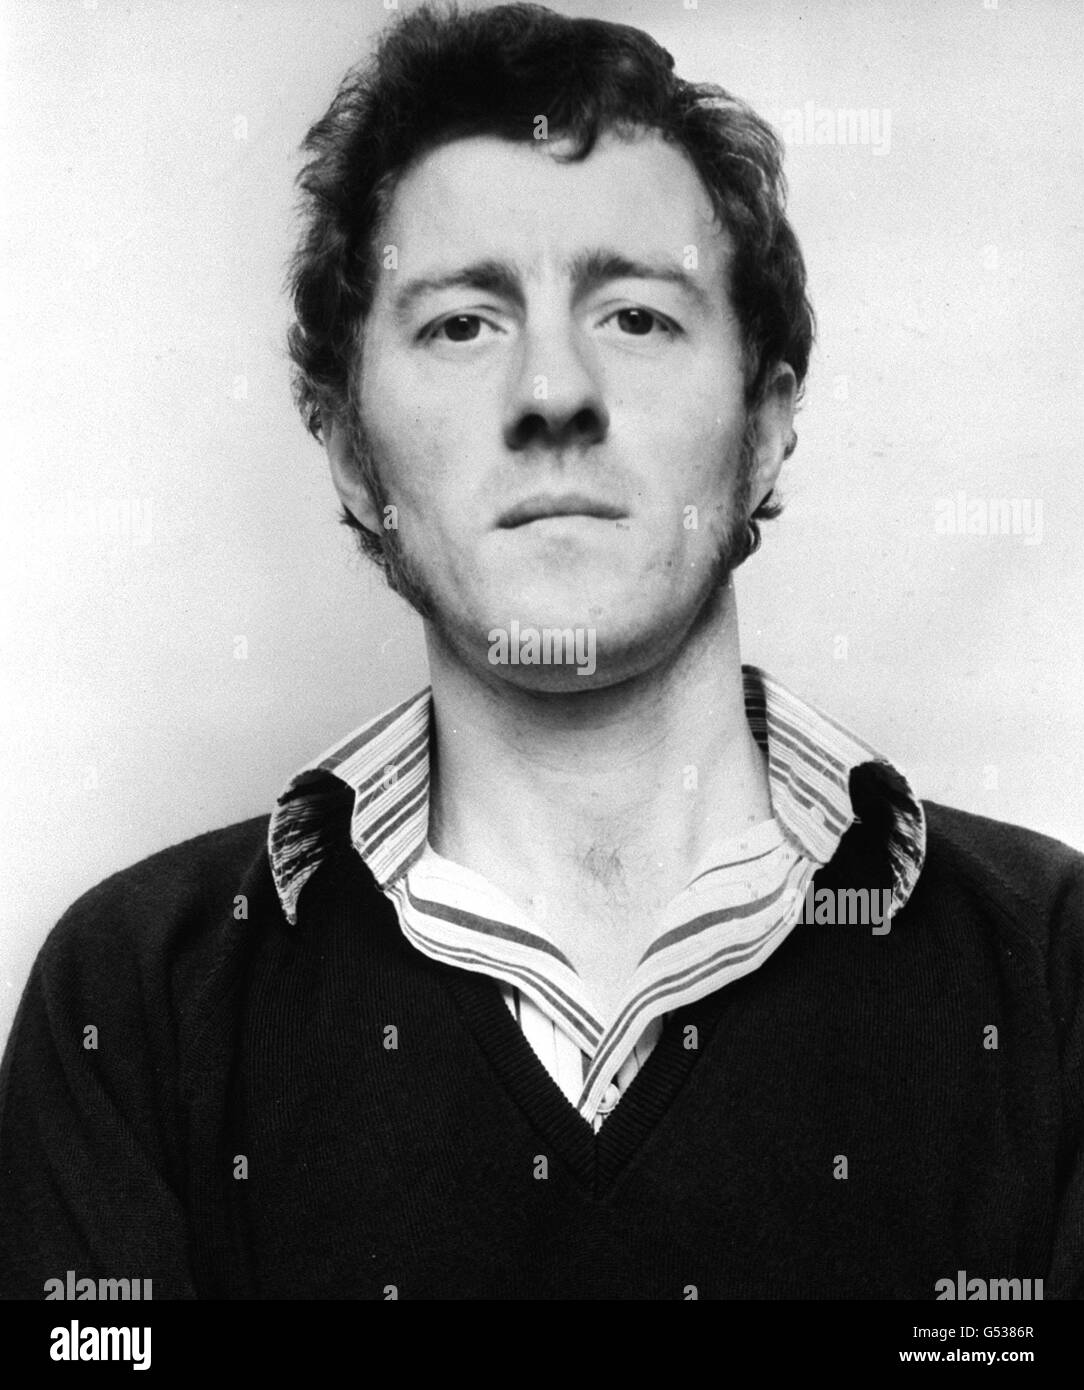 A July 1981 police picture of James Kay, 40, who was given a total of six years imprisonment, at Lancaster Crown Court, for two violent attacks on young women. *... Kay, who changed his name from Lang, carried out the attacks six months after he was released from a top security mental hospital, where he was serving 14 years for raping and killing a 12-year-old girl. Stock Photo